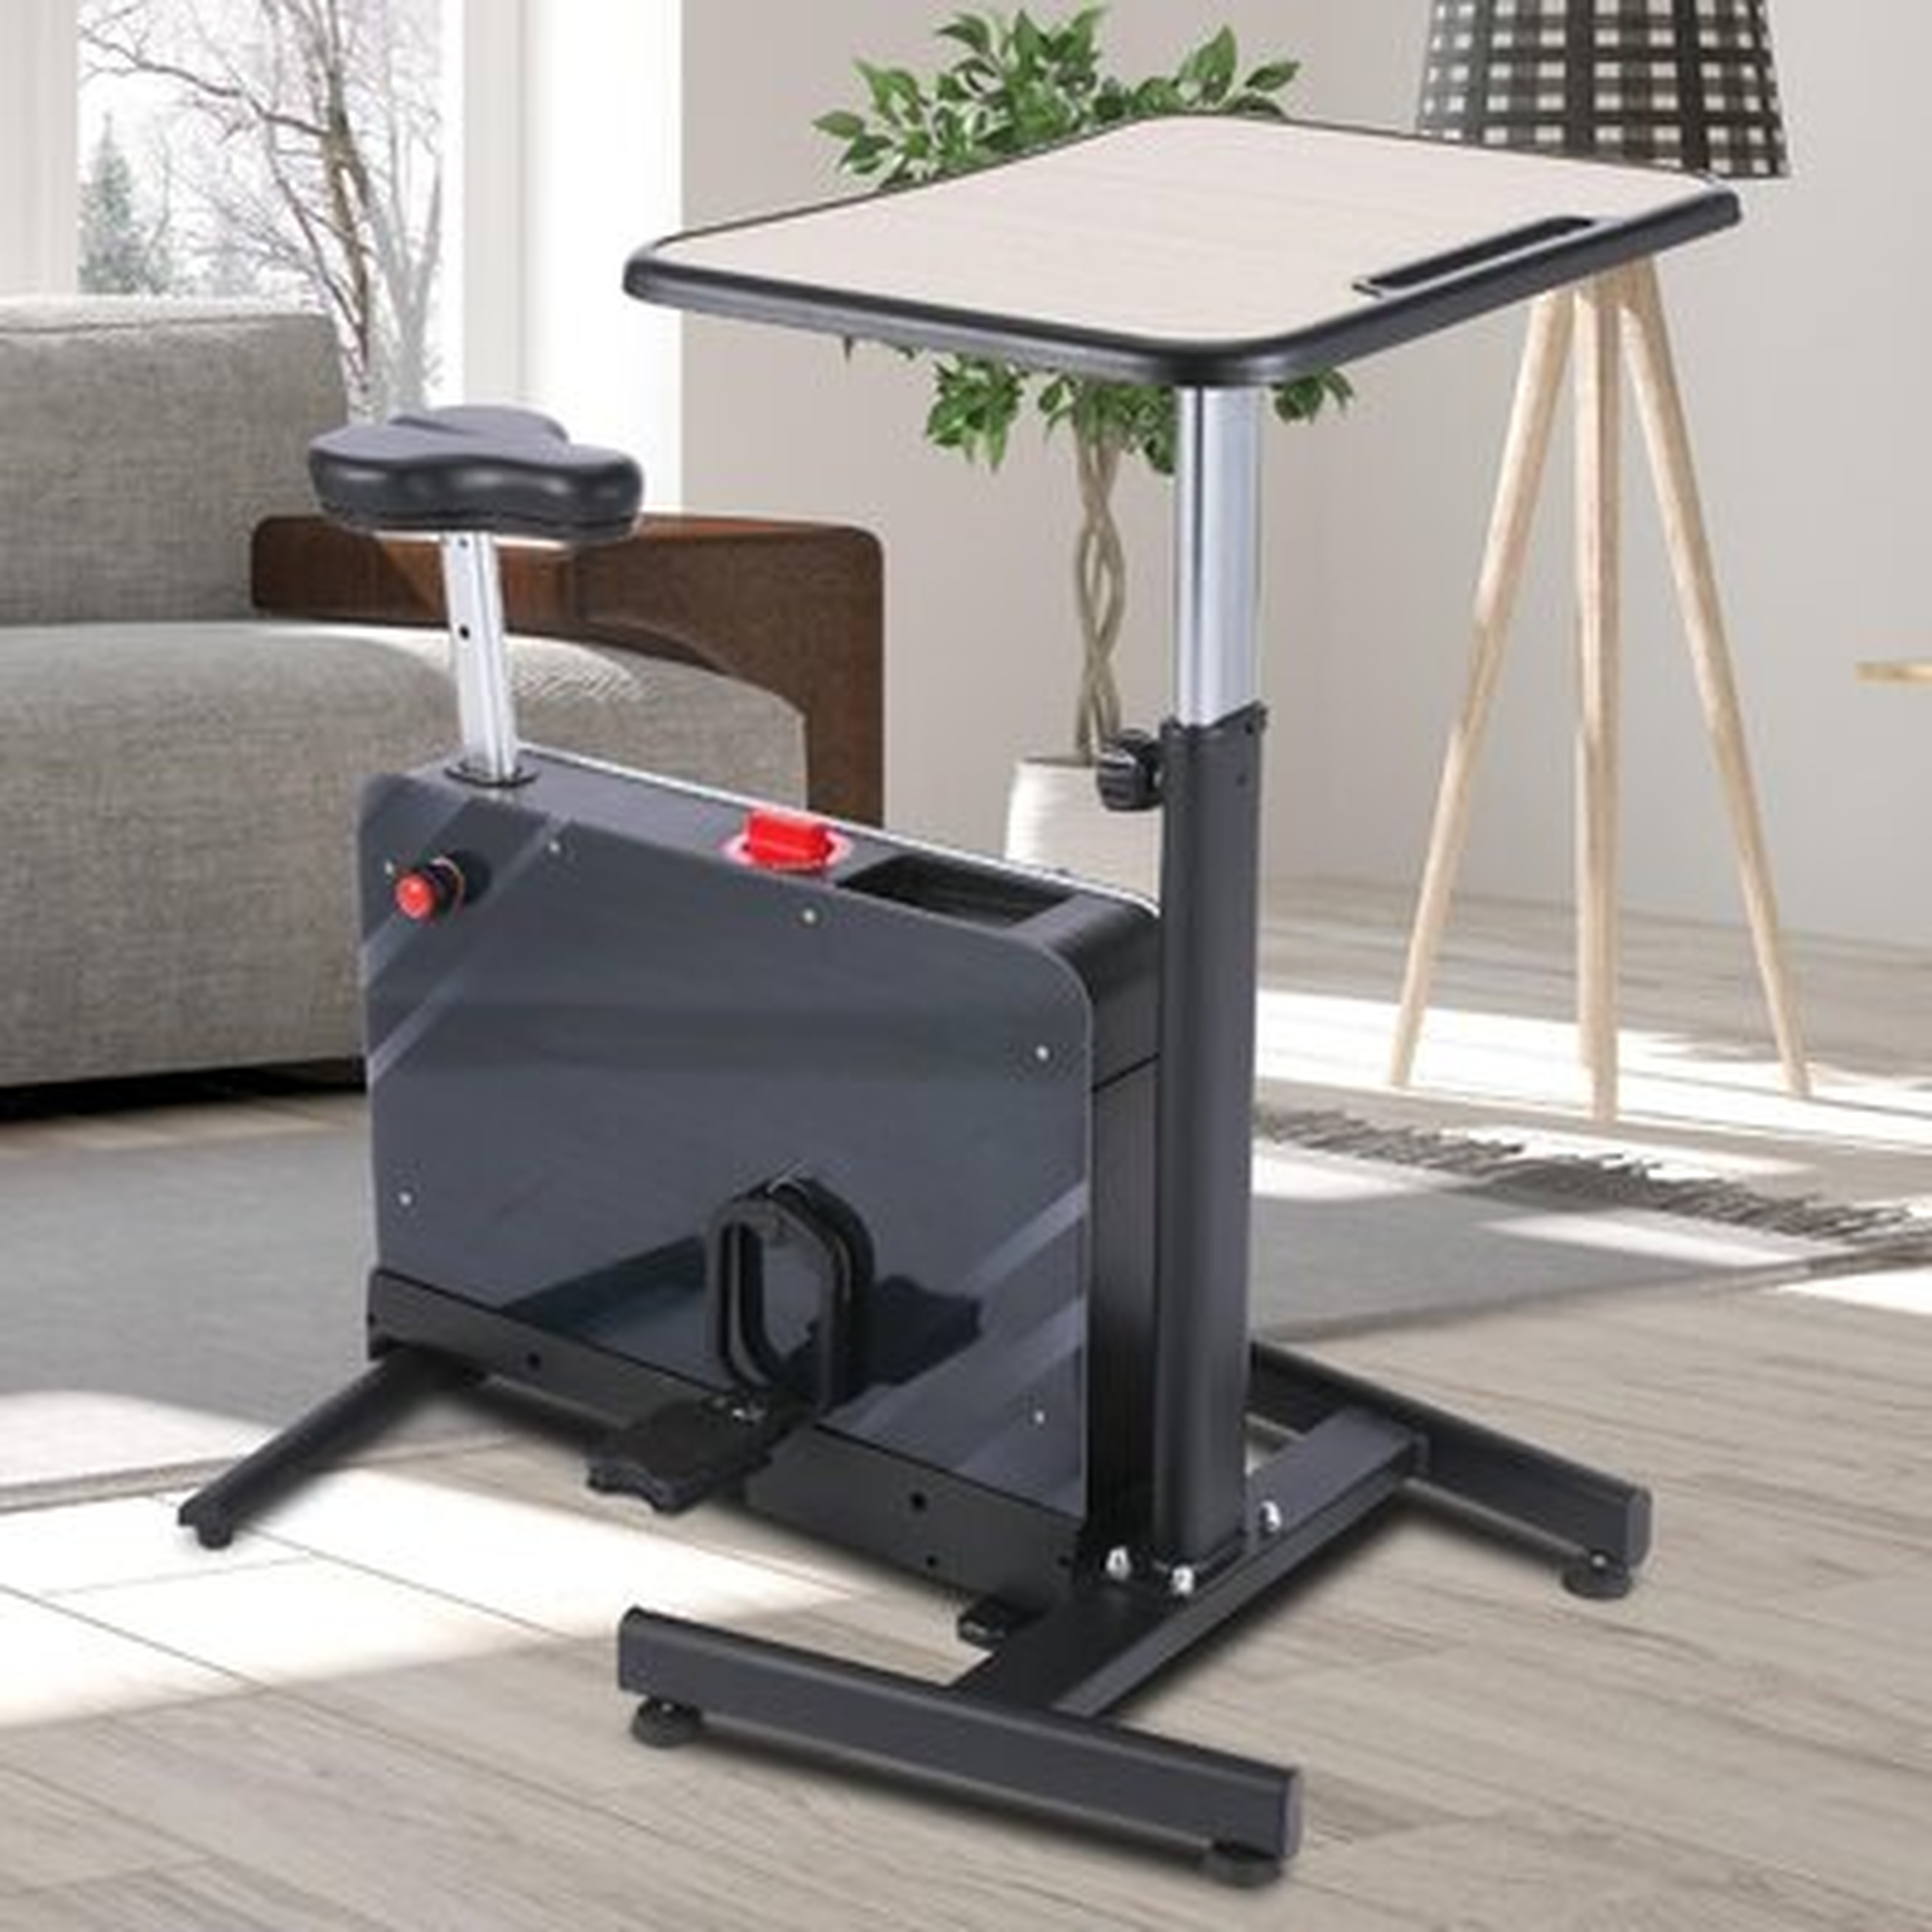 Pedal Exercise Bike Indoor Magnetic Resistance Cycling Chair With Table - Wayfair